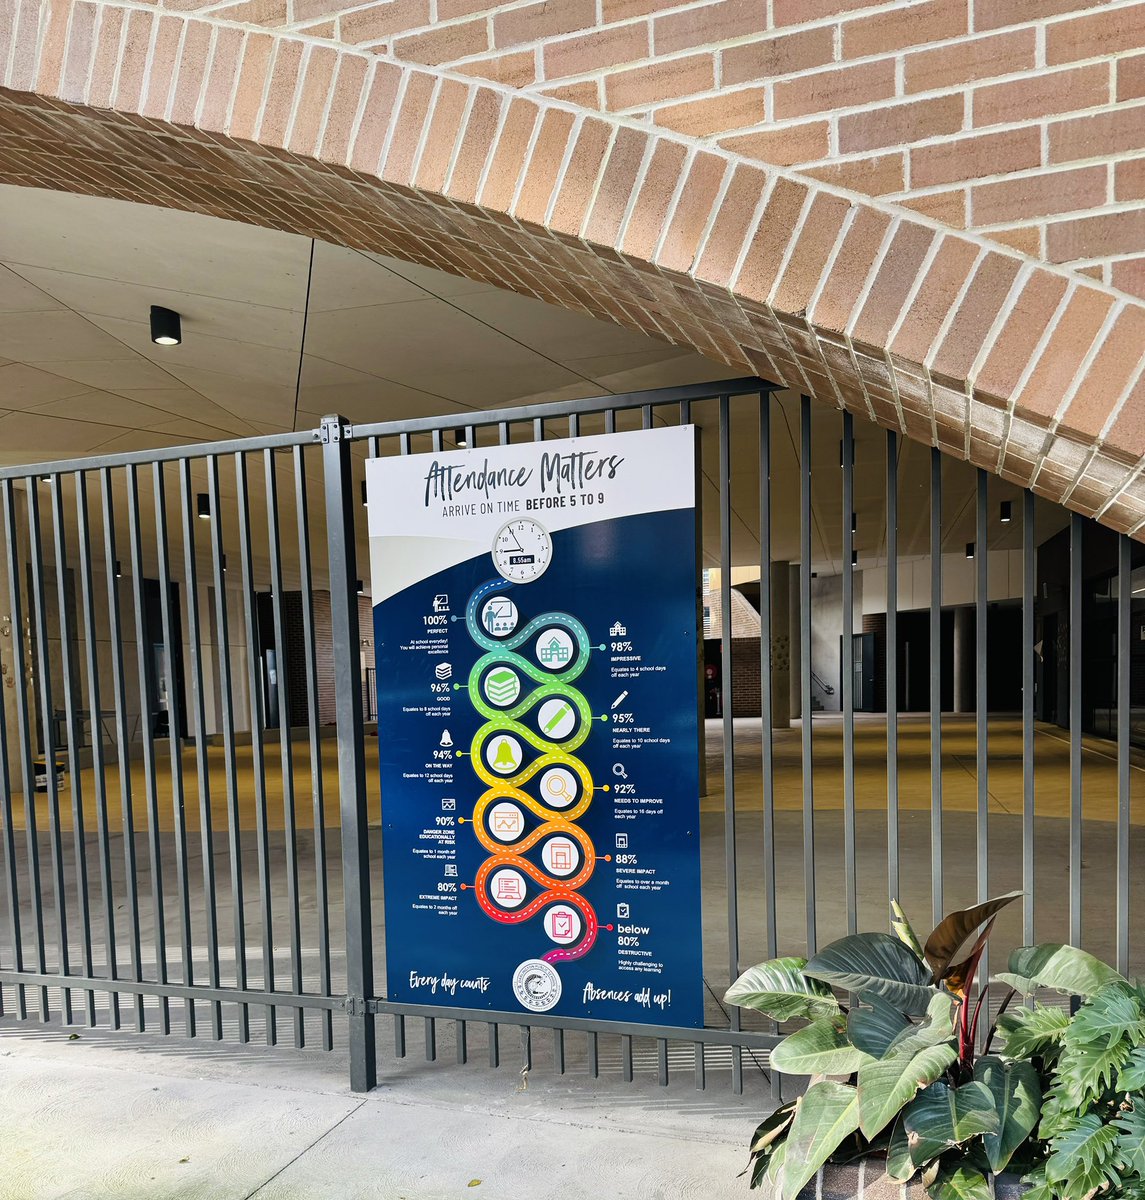 Our new attendance signs were installed today @DarloPS  
Research says a student's attendance strongly impacts their learning, social development & wellbeing.
Every school day matters, every class matters, every school activity matters.
@NSWEducation #LoveWhereYouLearn